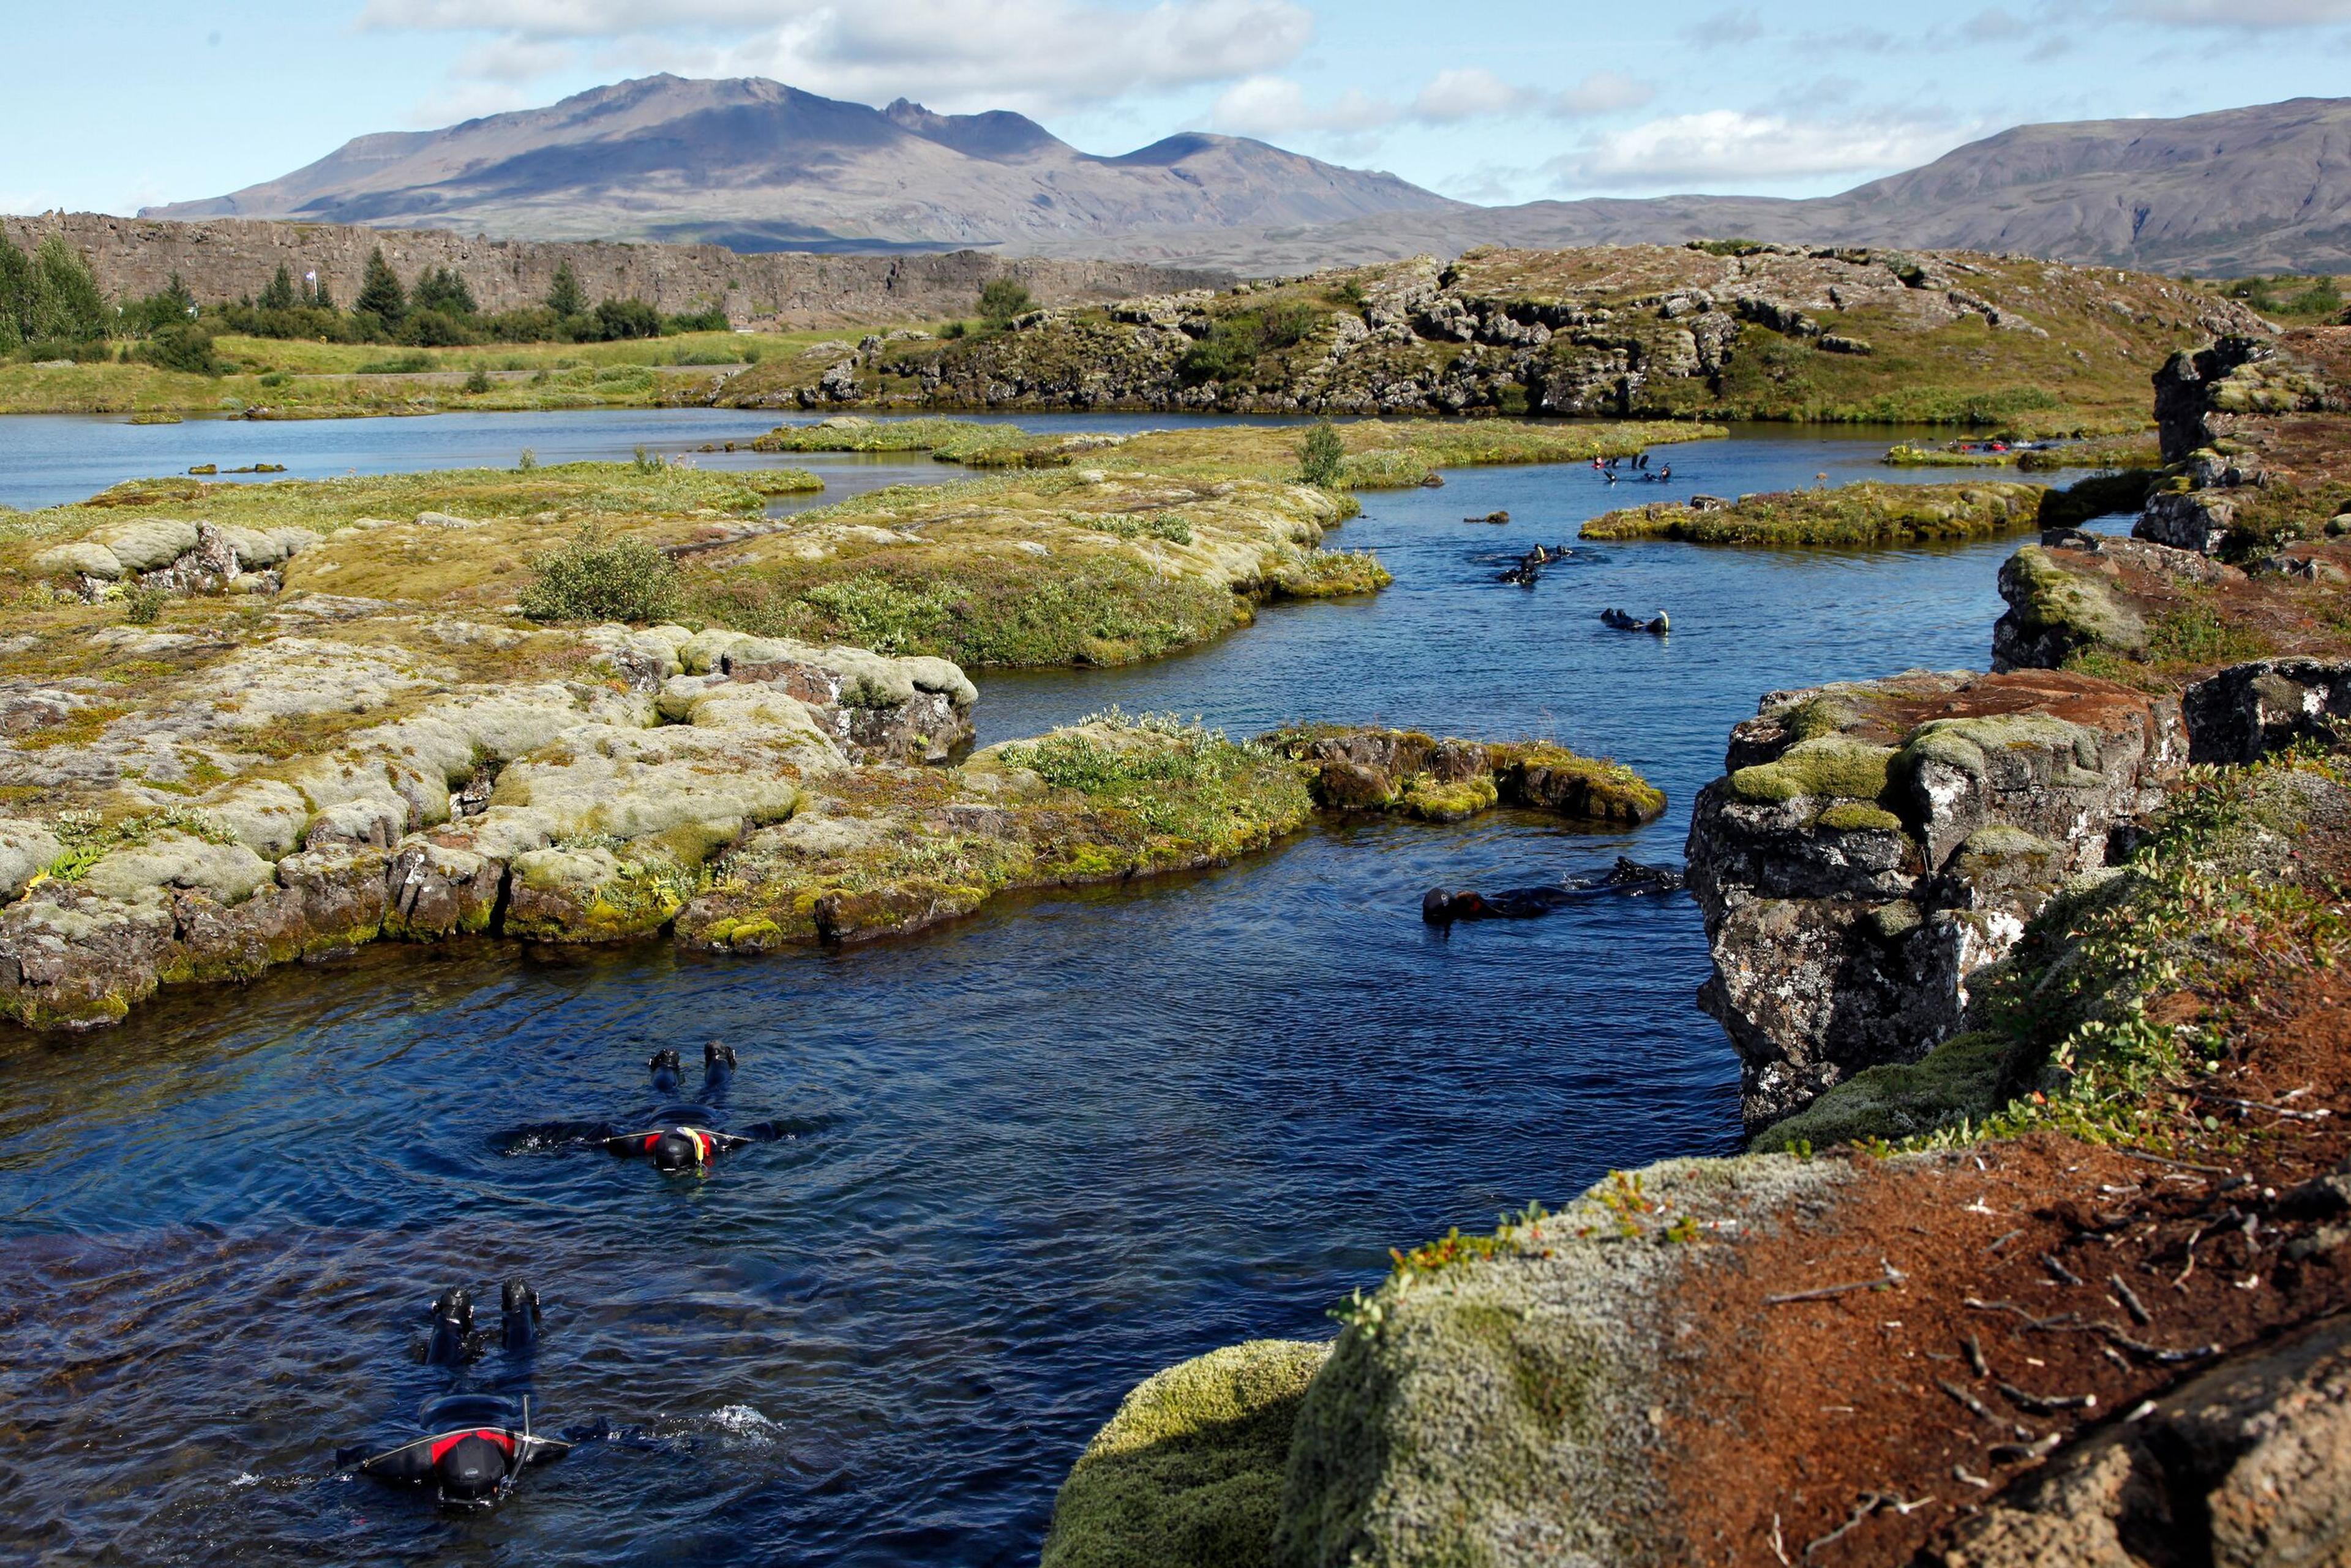 Scuba divers in a serene, clear water river surrounded by moss-covered lava rocks and a lush green landscape, with a backdrop of distant mountains under a blue sky.